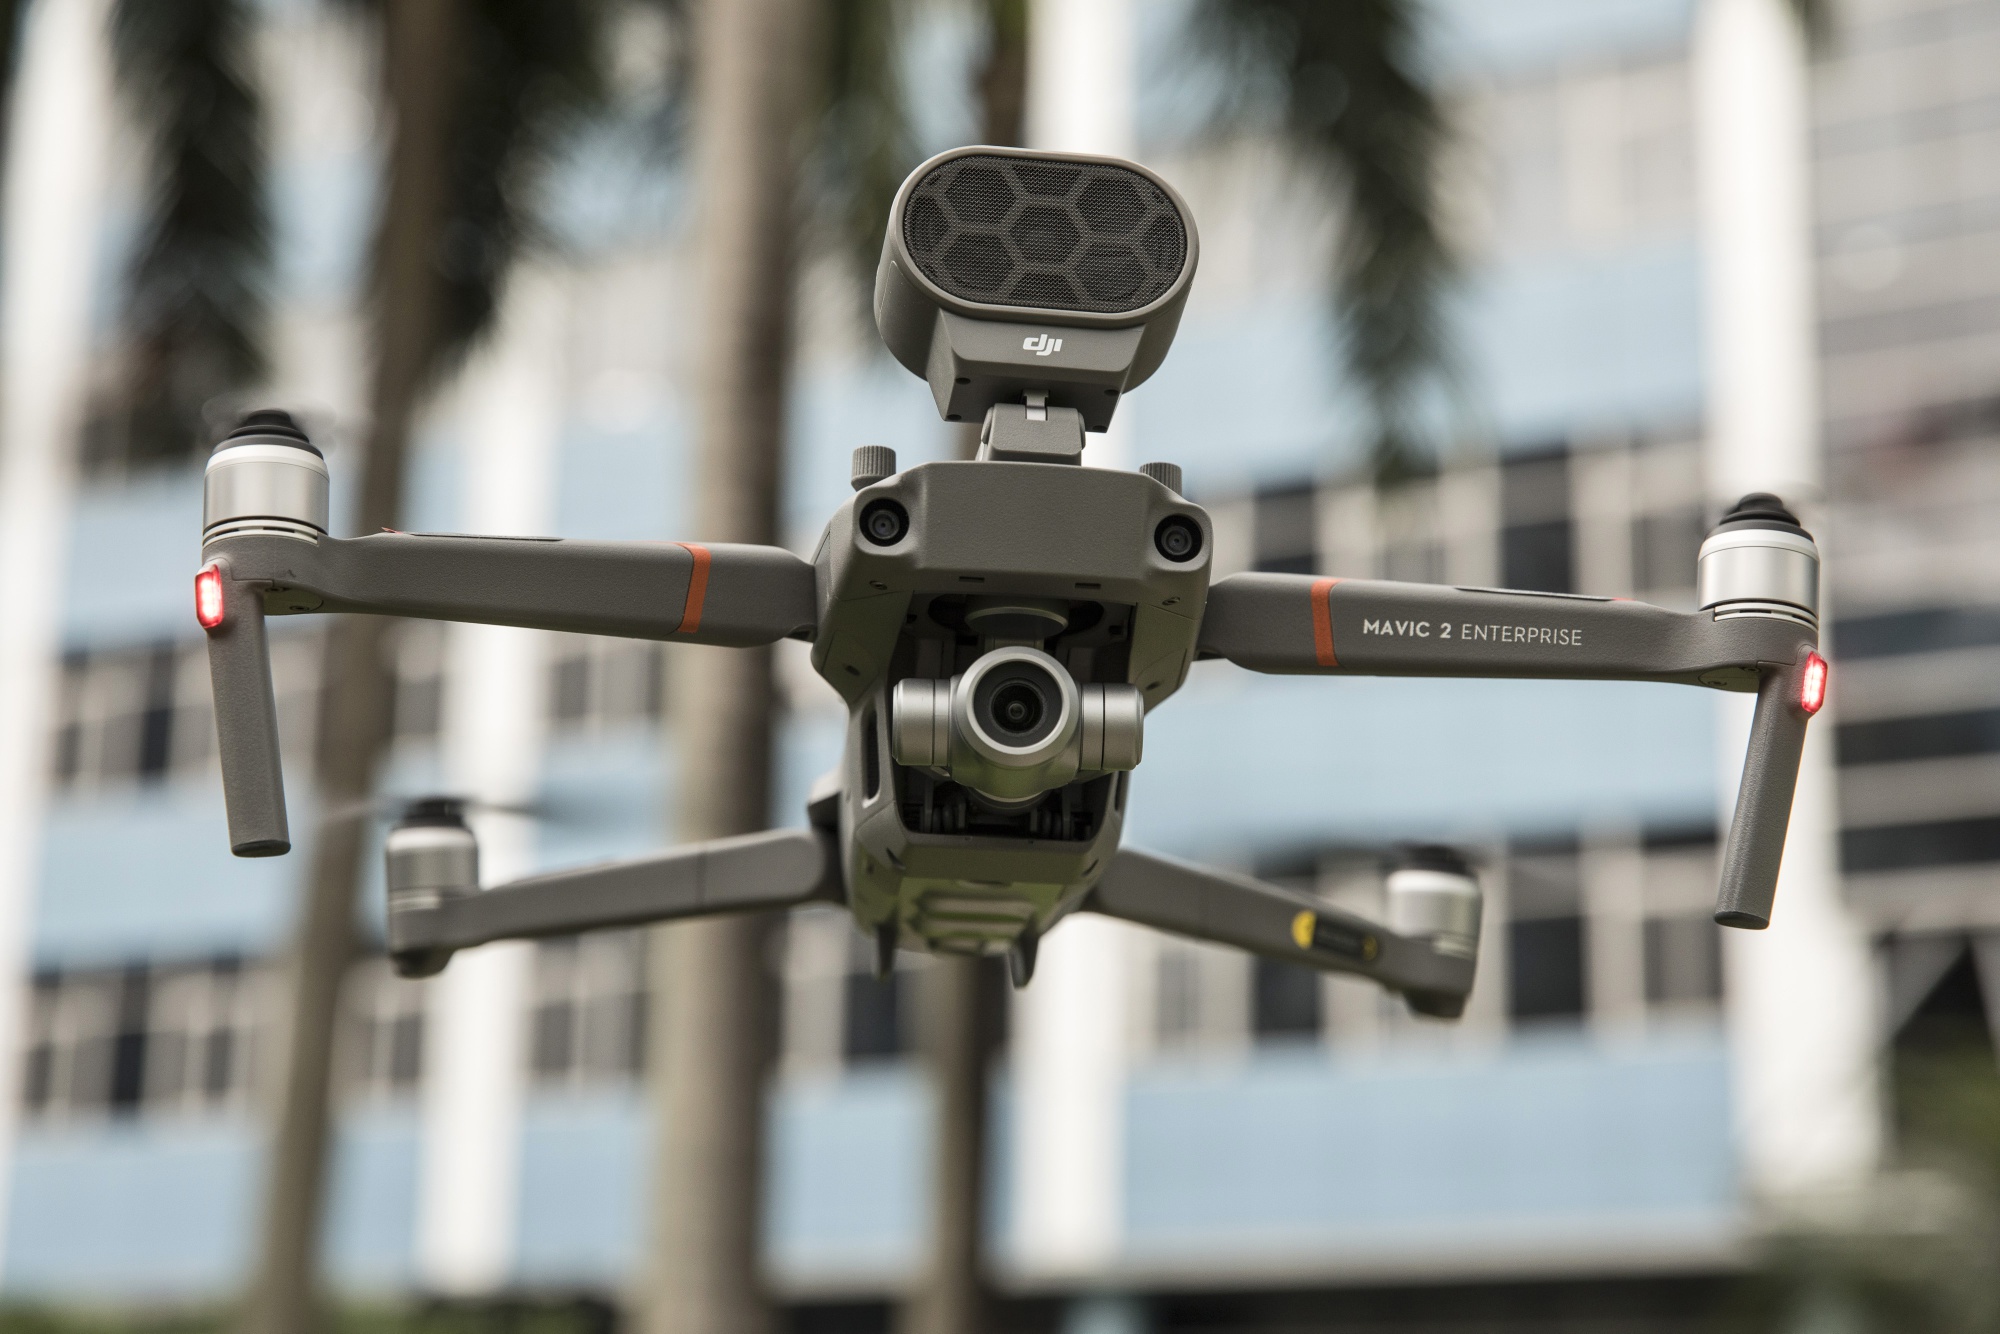 Drone Patent Wars Ahead of DJI's Latest Product Launch Bloomberg